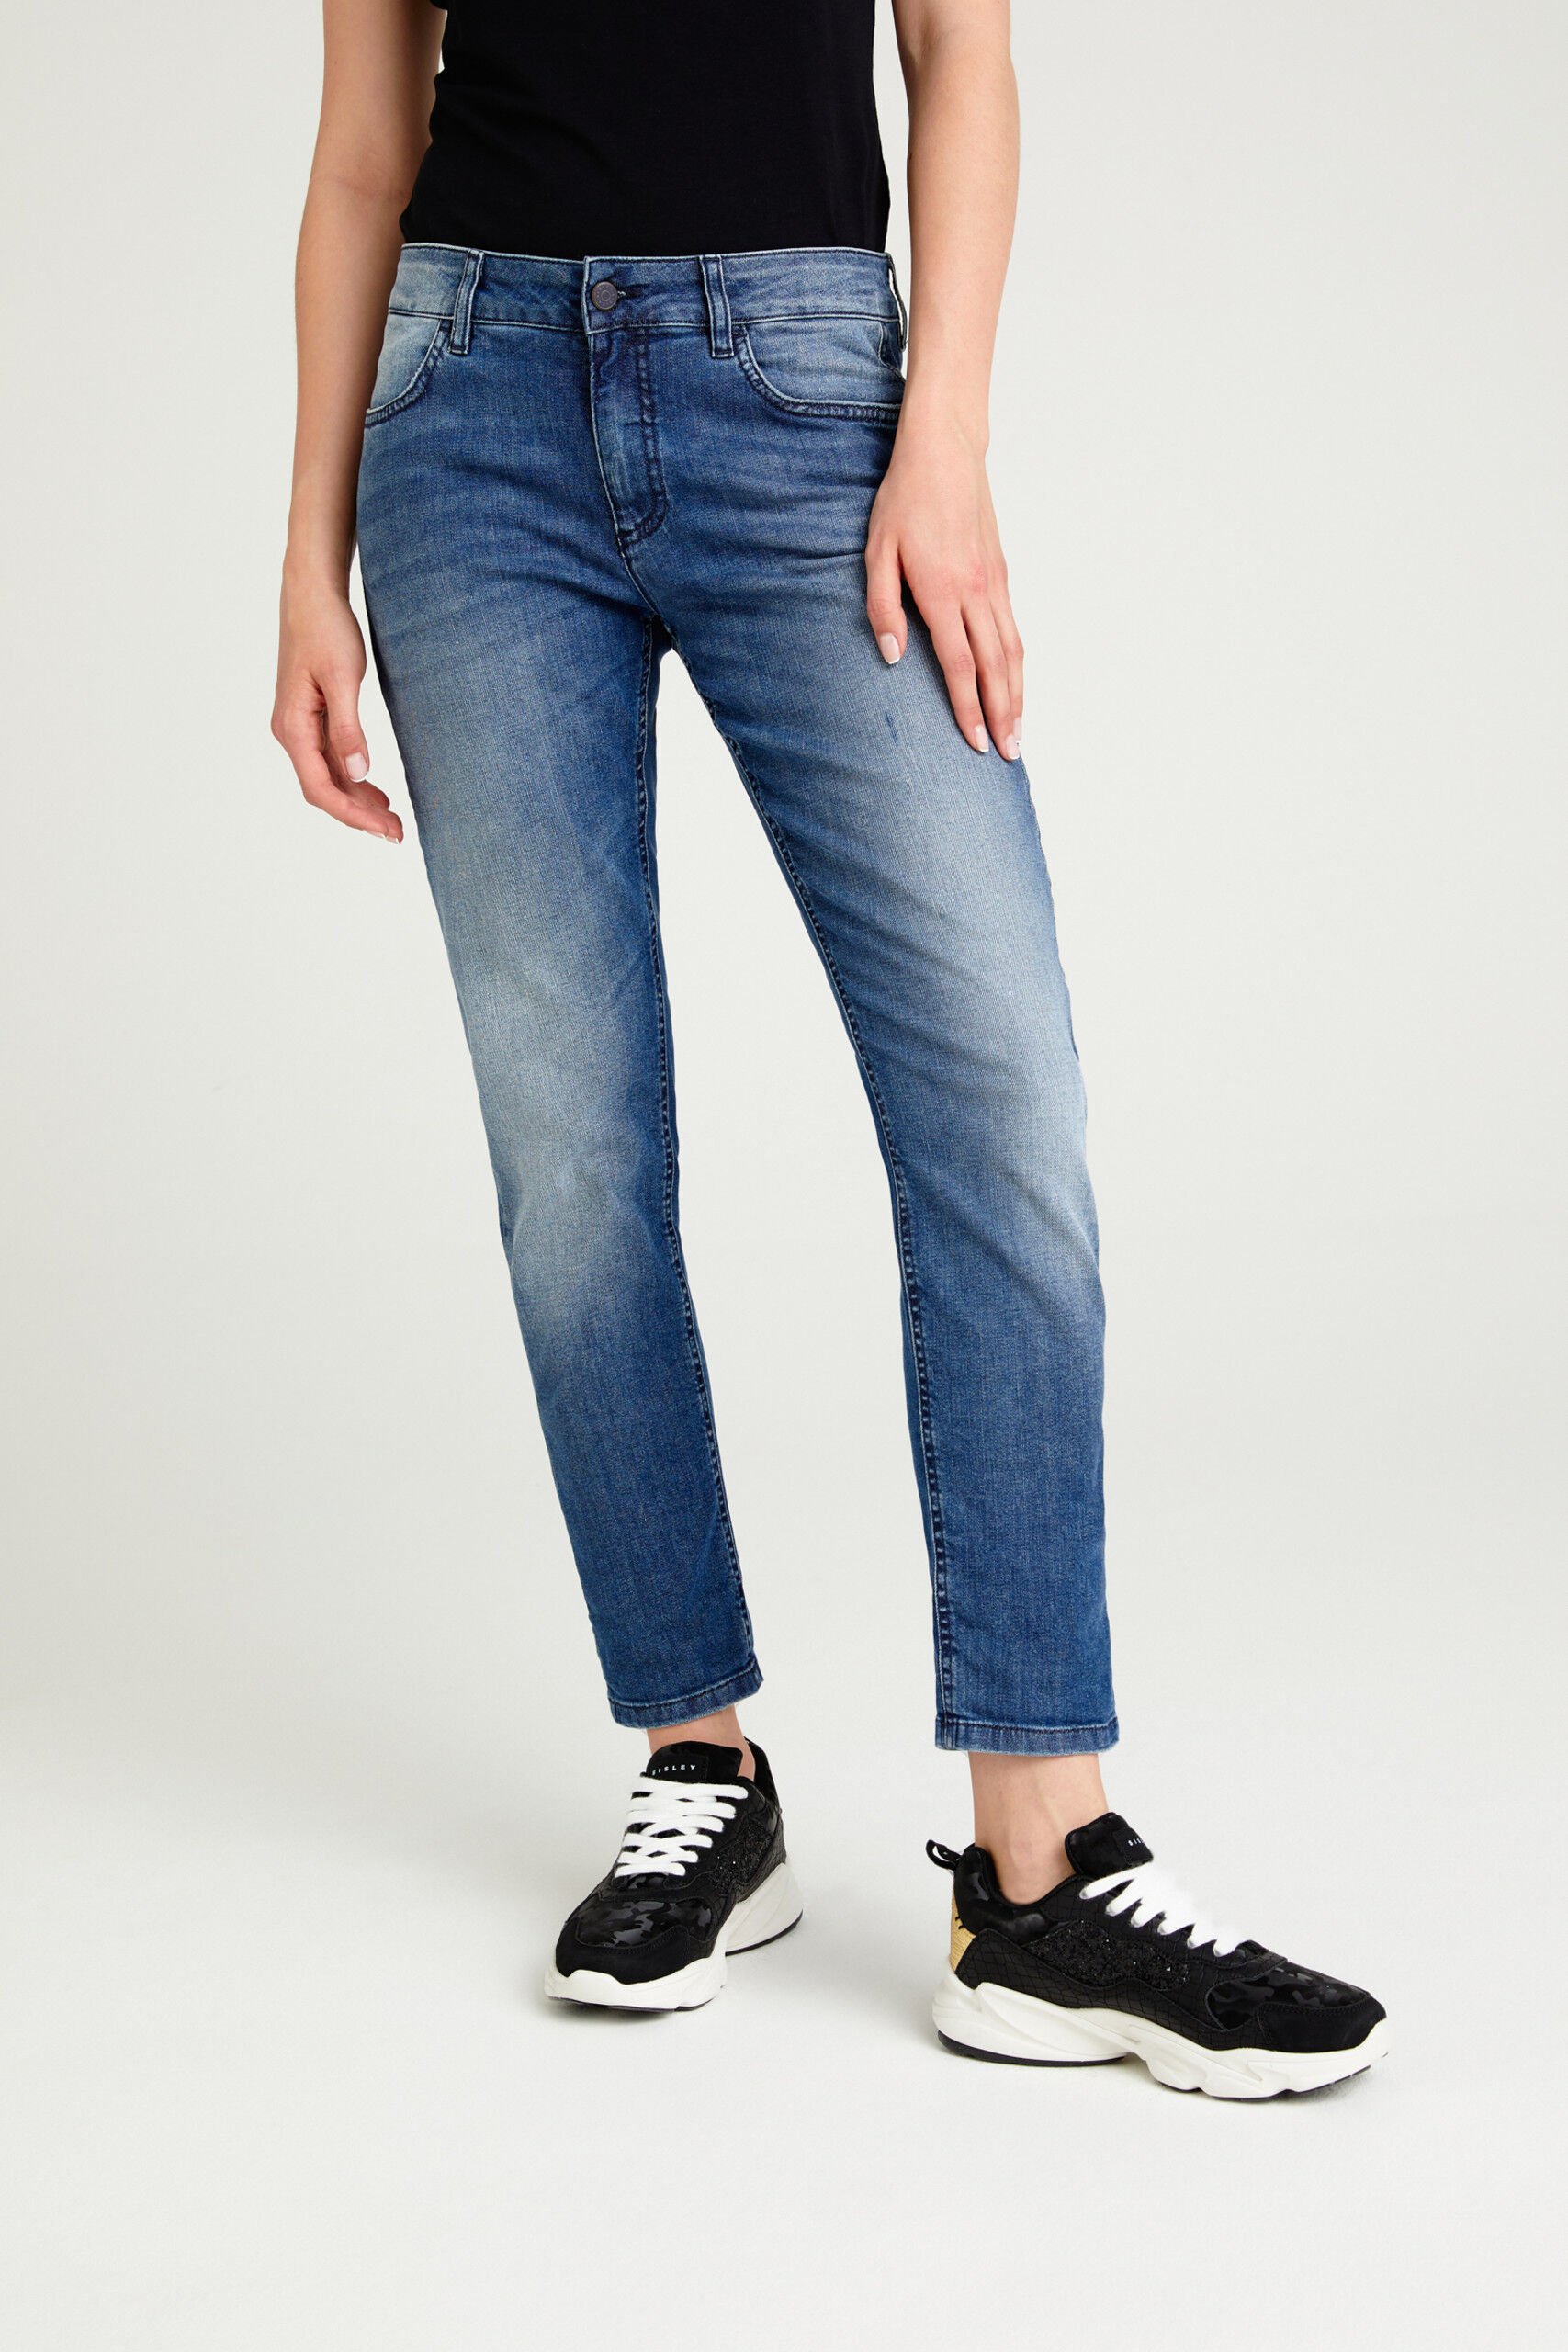 Women's Carrot Fit Jeans New Collection 2021 | Sisley